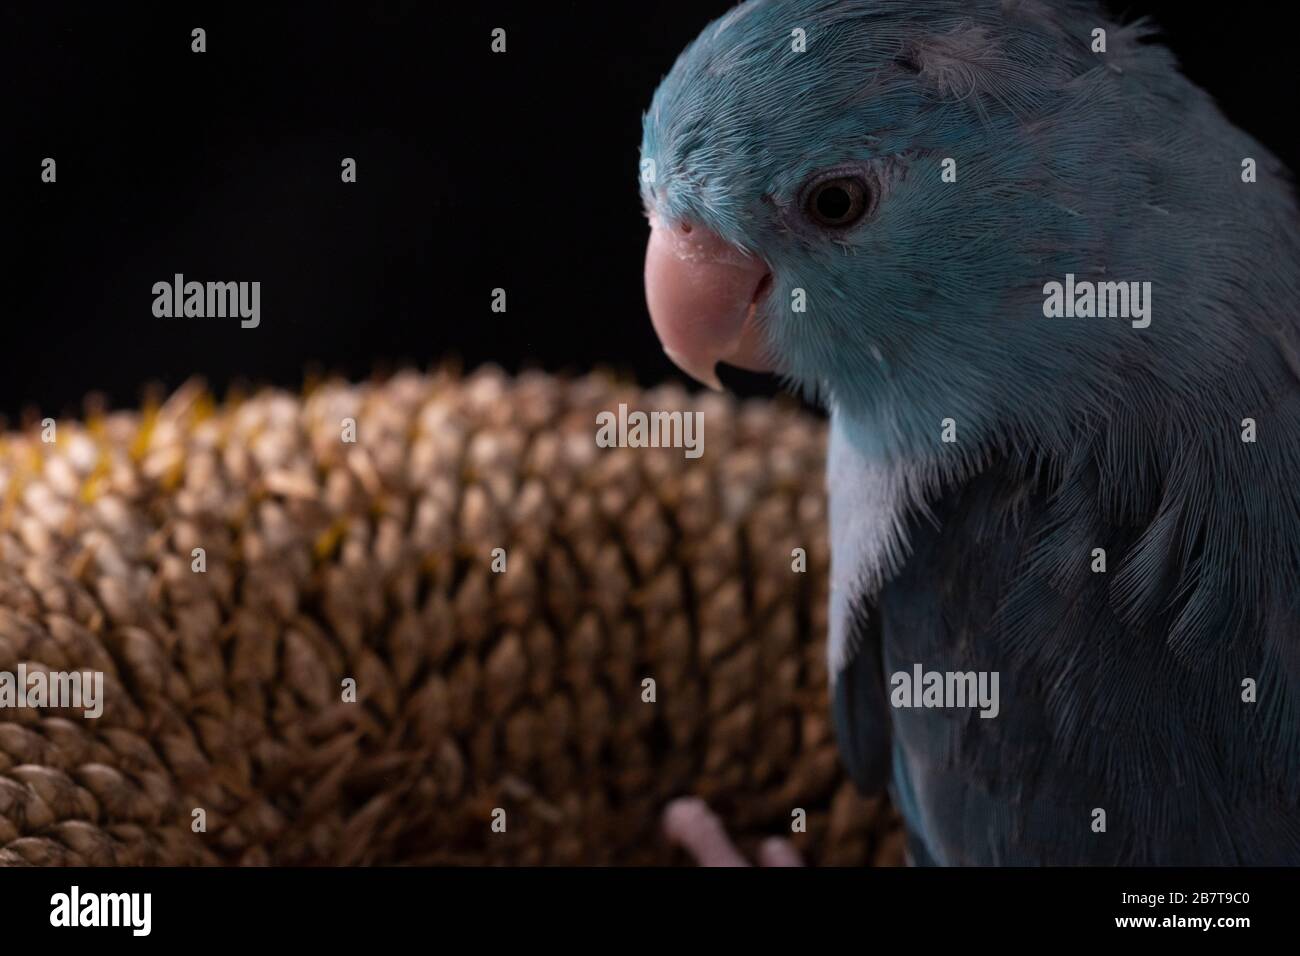 Celestial parrodomestictlet on a dried sunflower head Stock Photo